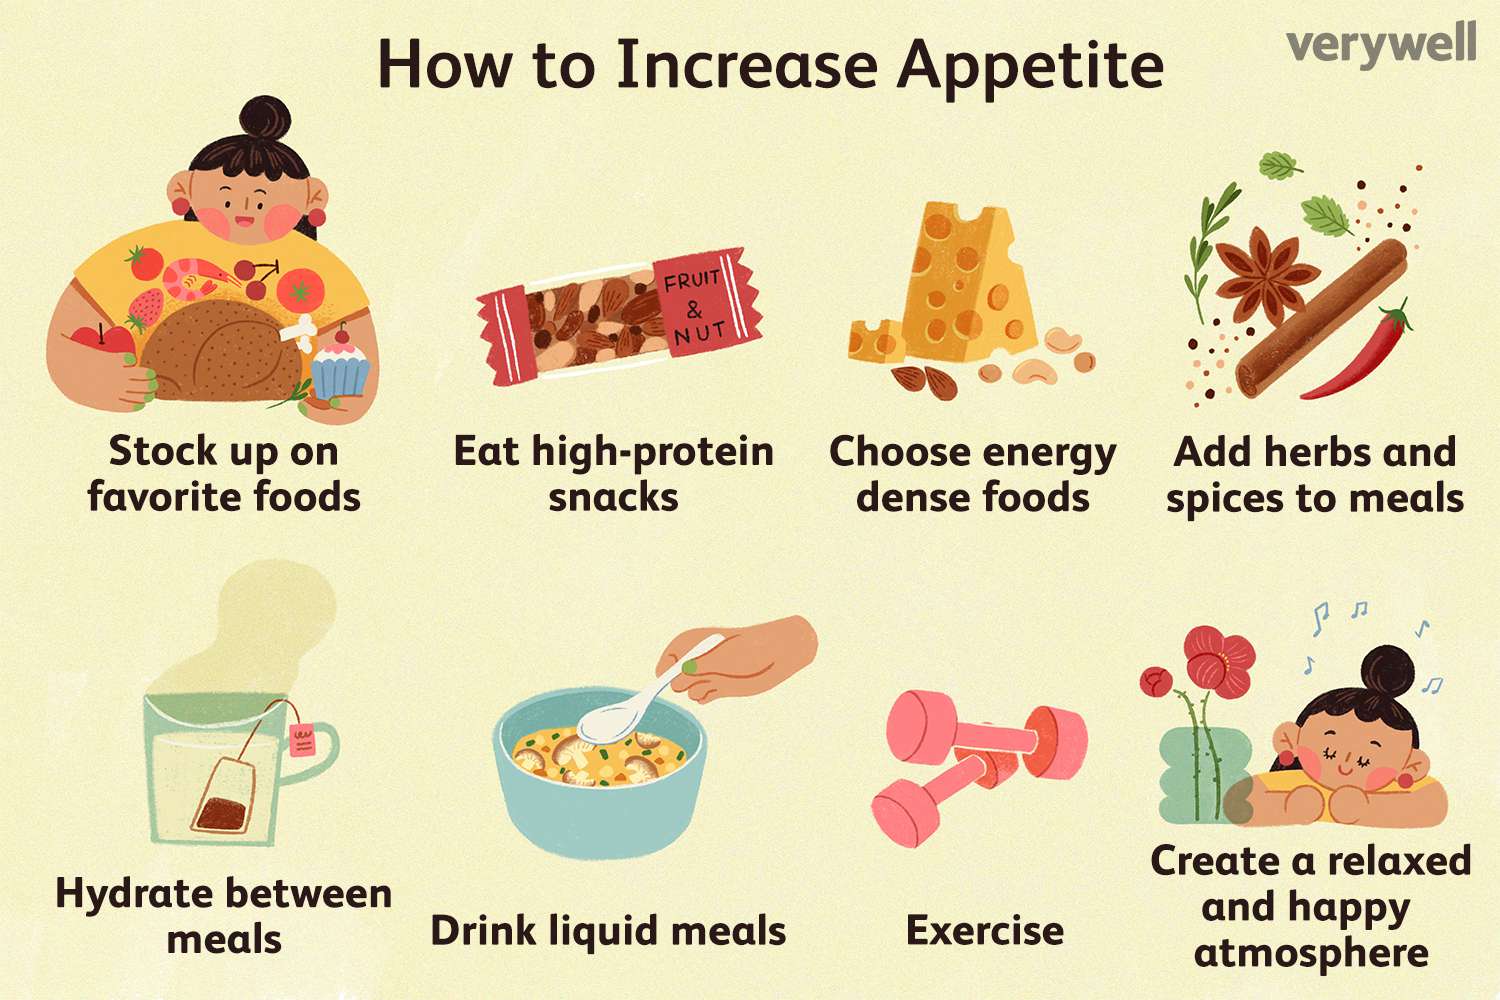 7 Healthy Ways to Increase Appetite